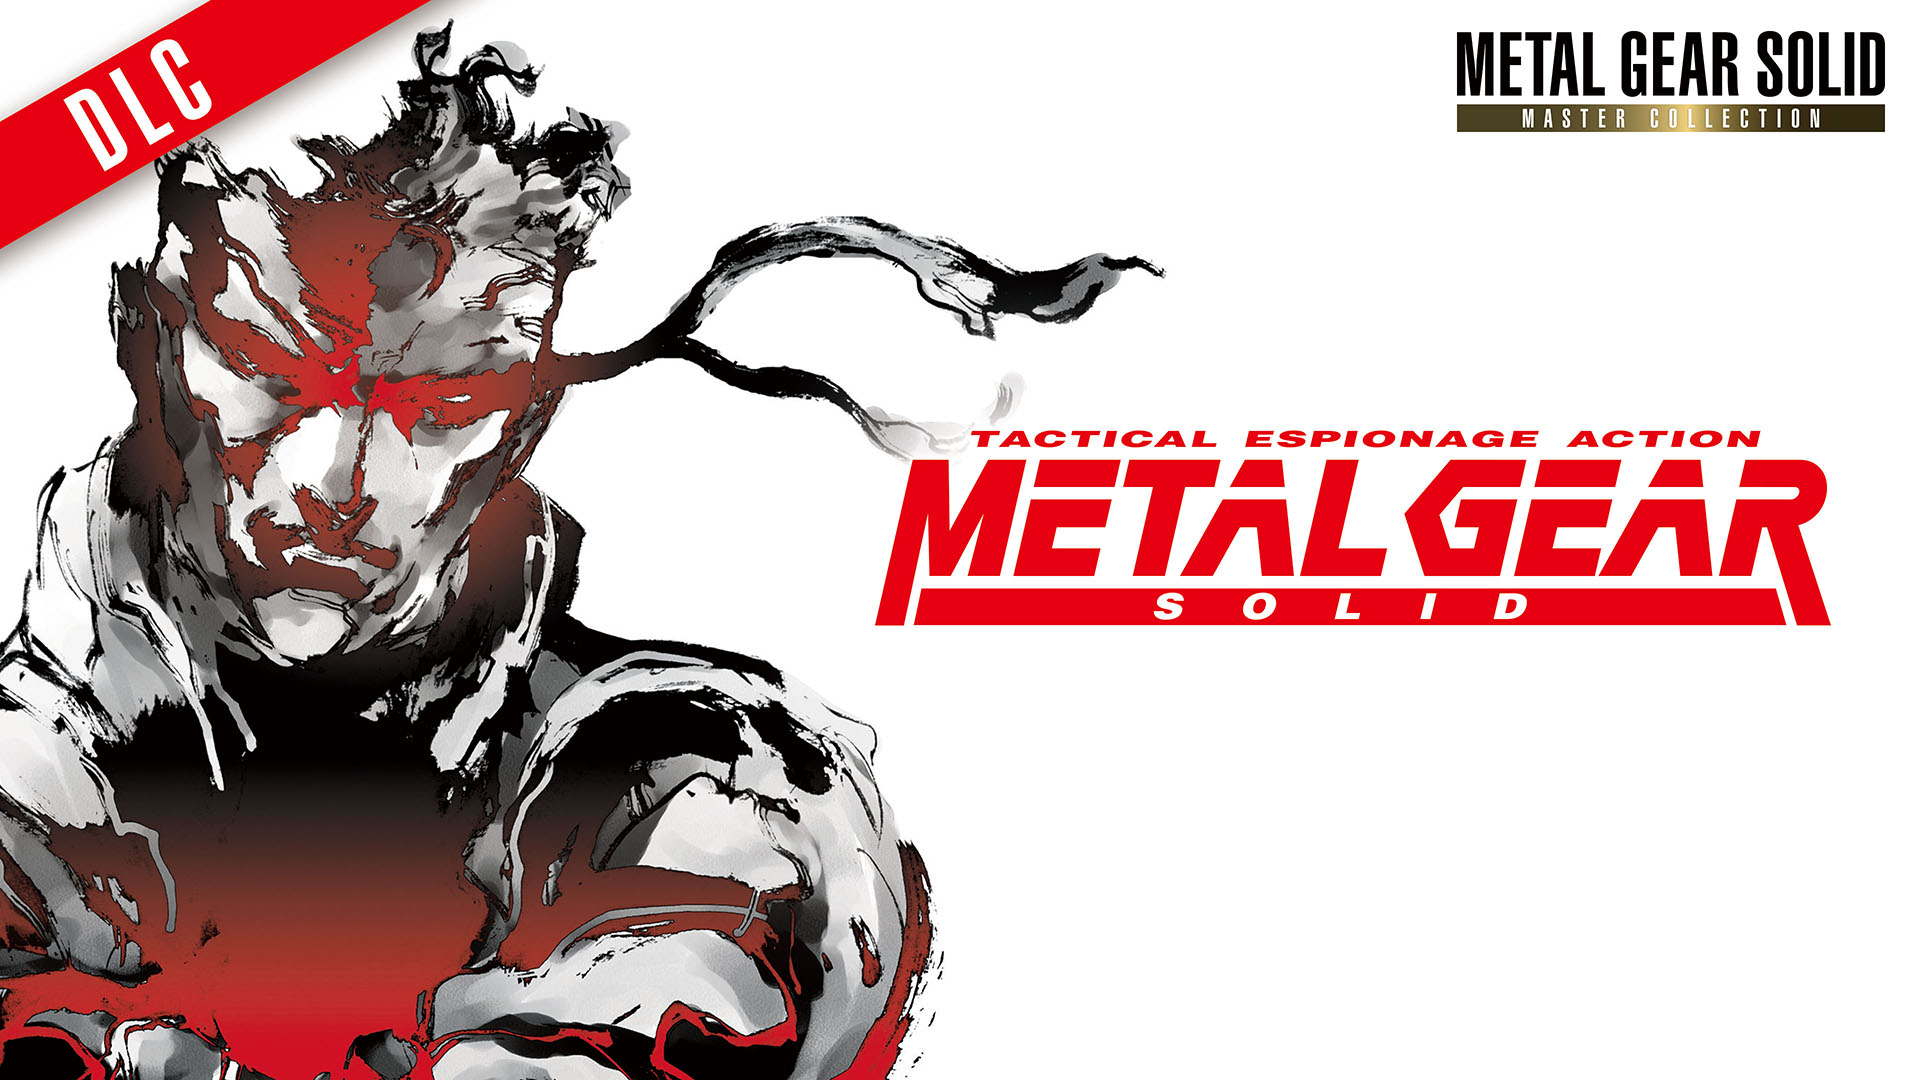 METAL GEAR SOLID - Master Collection Version Japanese Language Pack